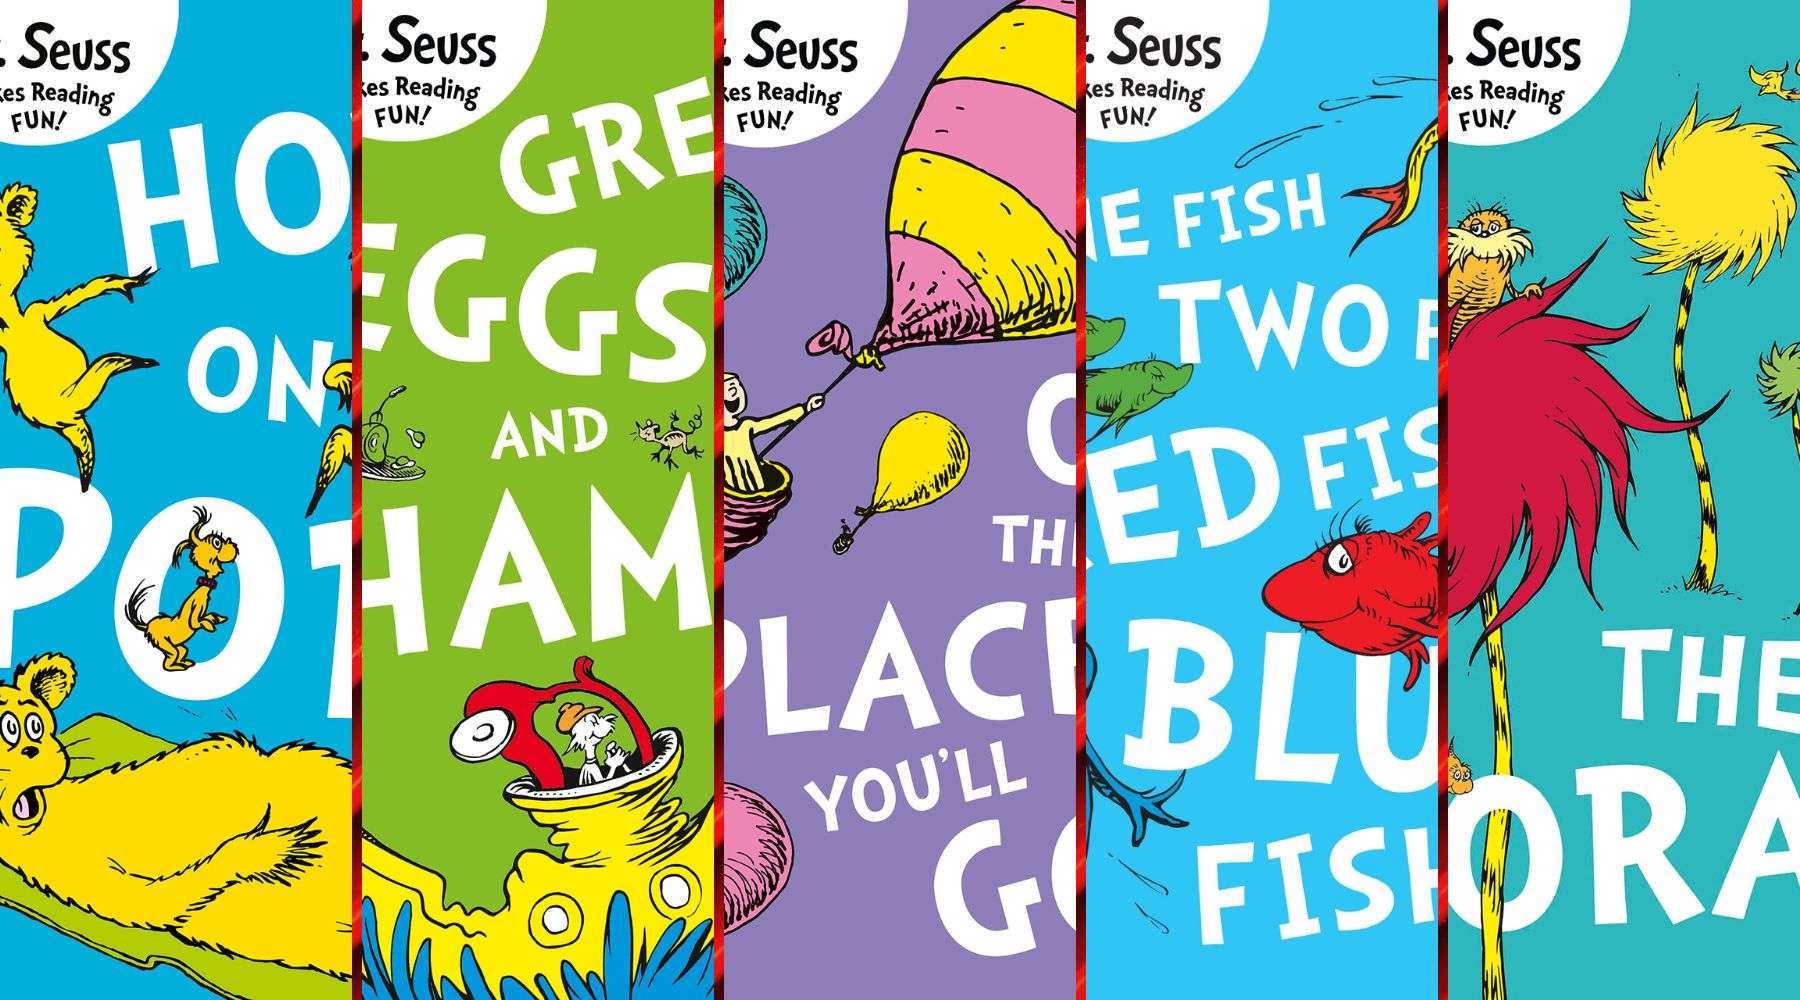 A selection of partial Dr. Seuss book covers